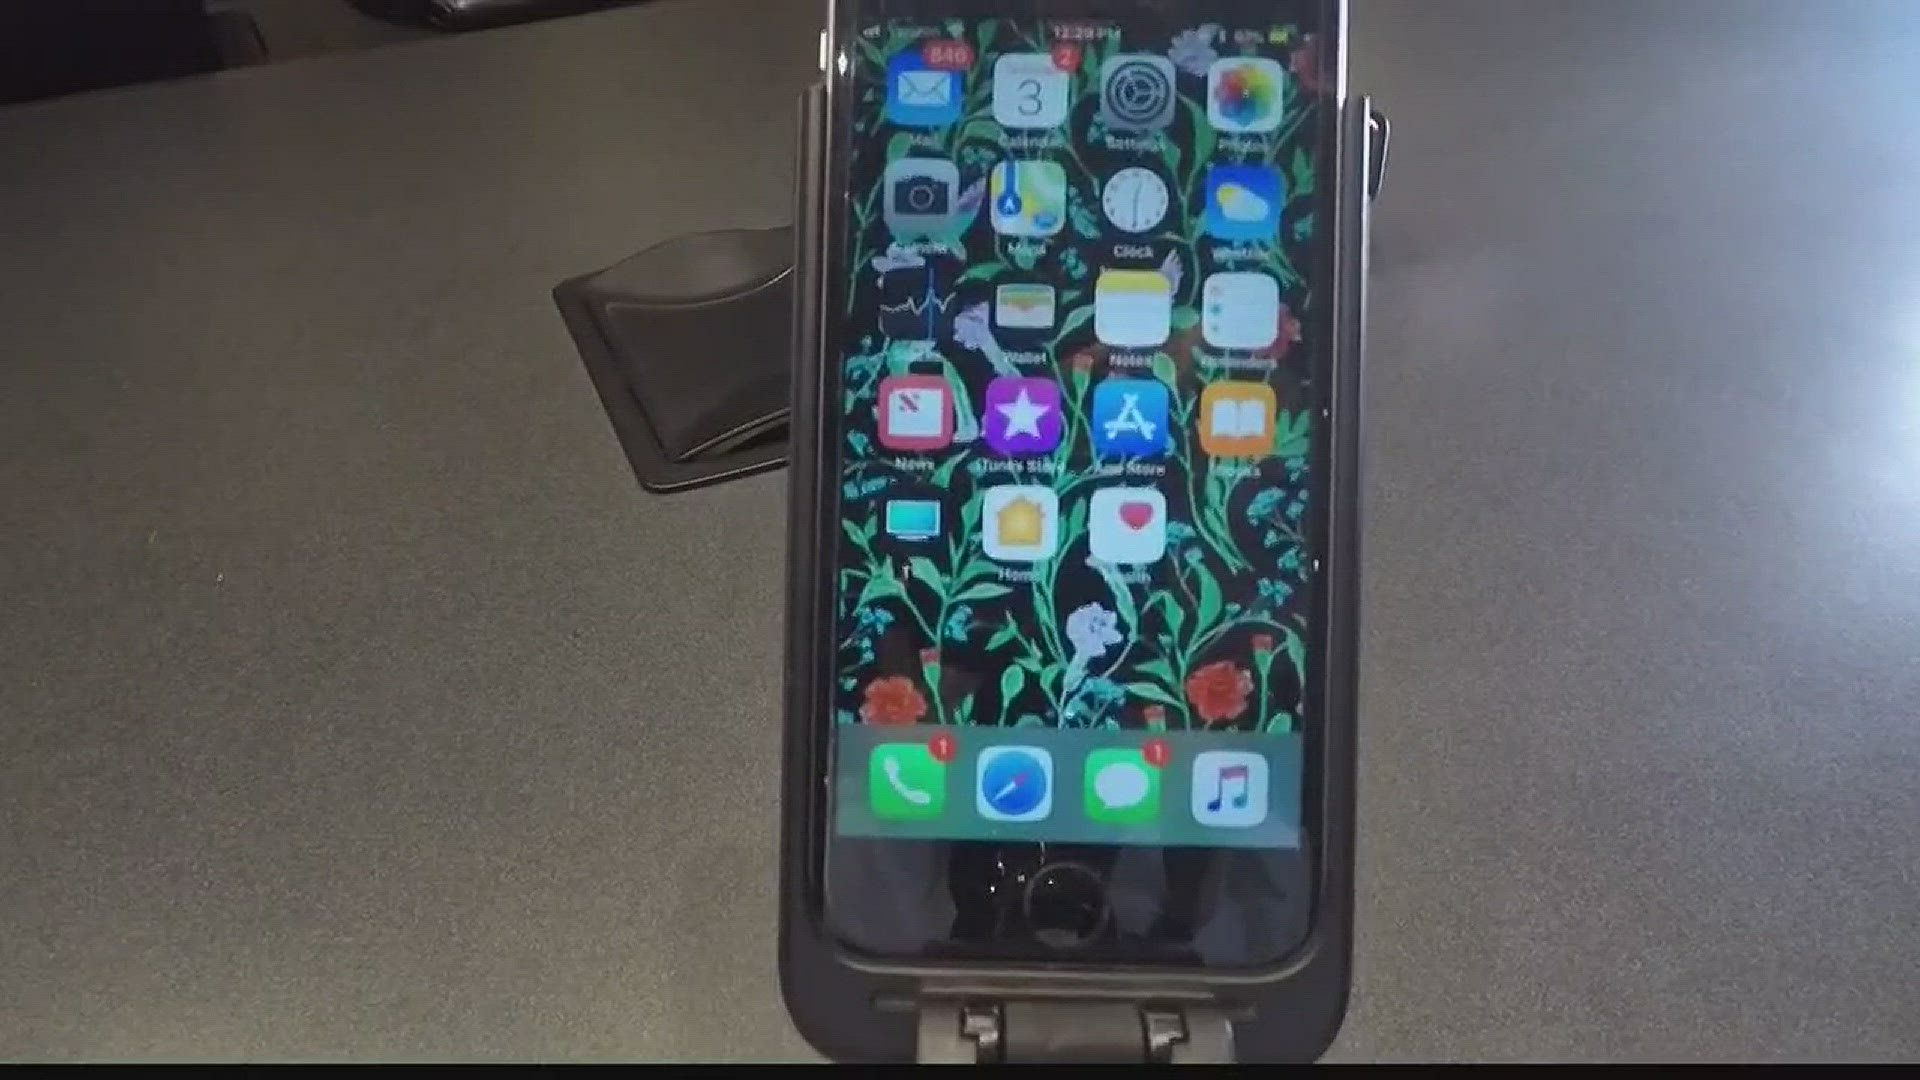 According to research firm 'Wandera'.. it takes an average of one hour and 30 minutes to completely drain your phone battery. KREM 2's DanaMarie McNicholl shows us how you can extend the battery life.